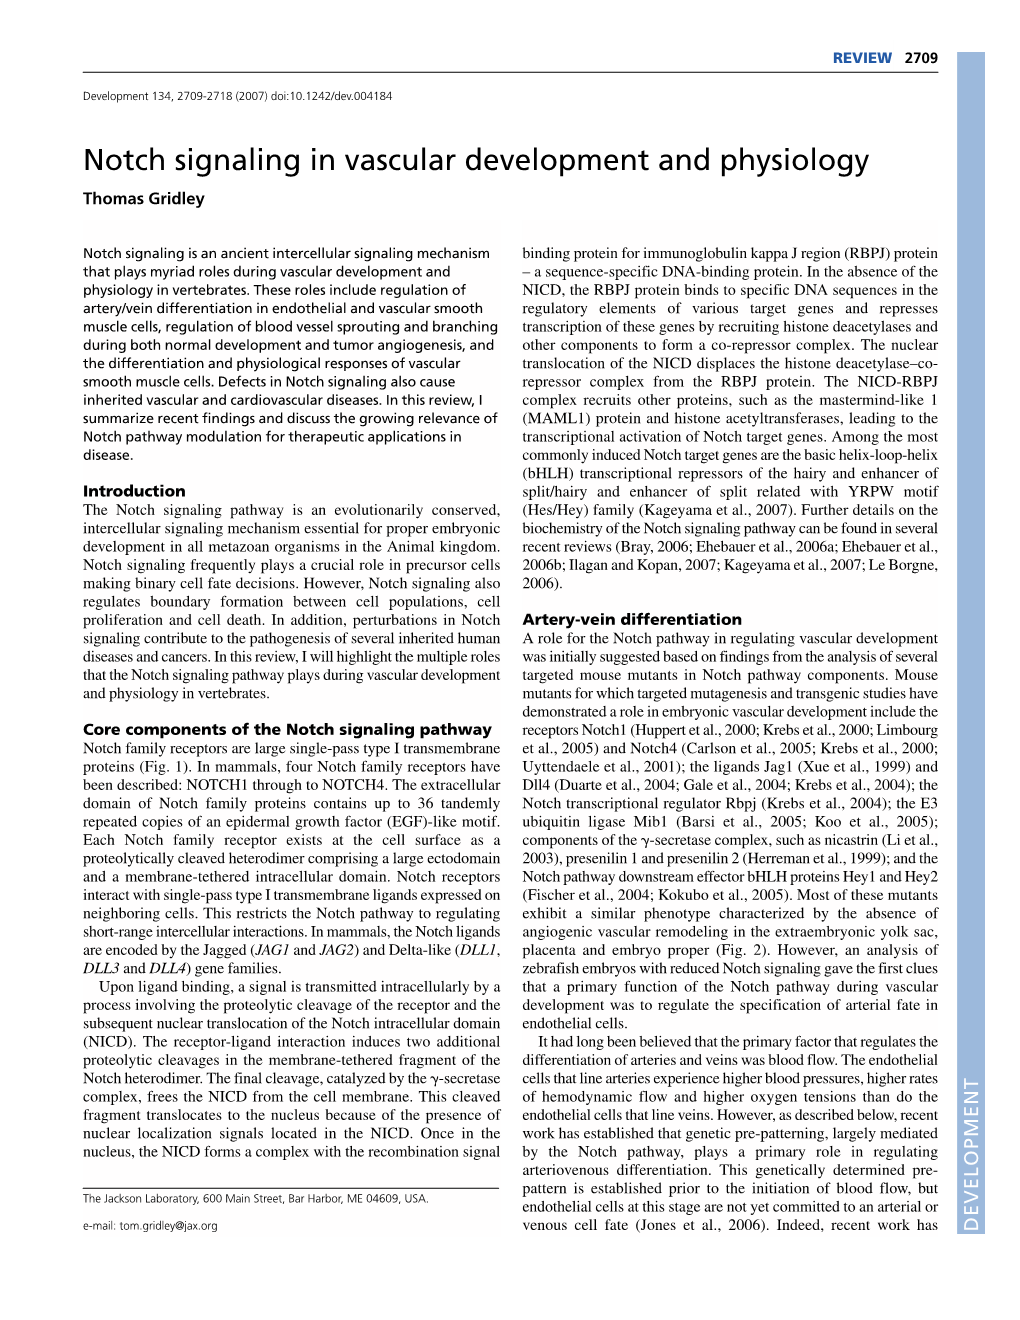 Notch Signaling in Vascular Development and Physiology